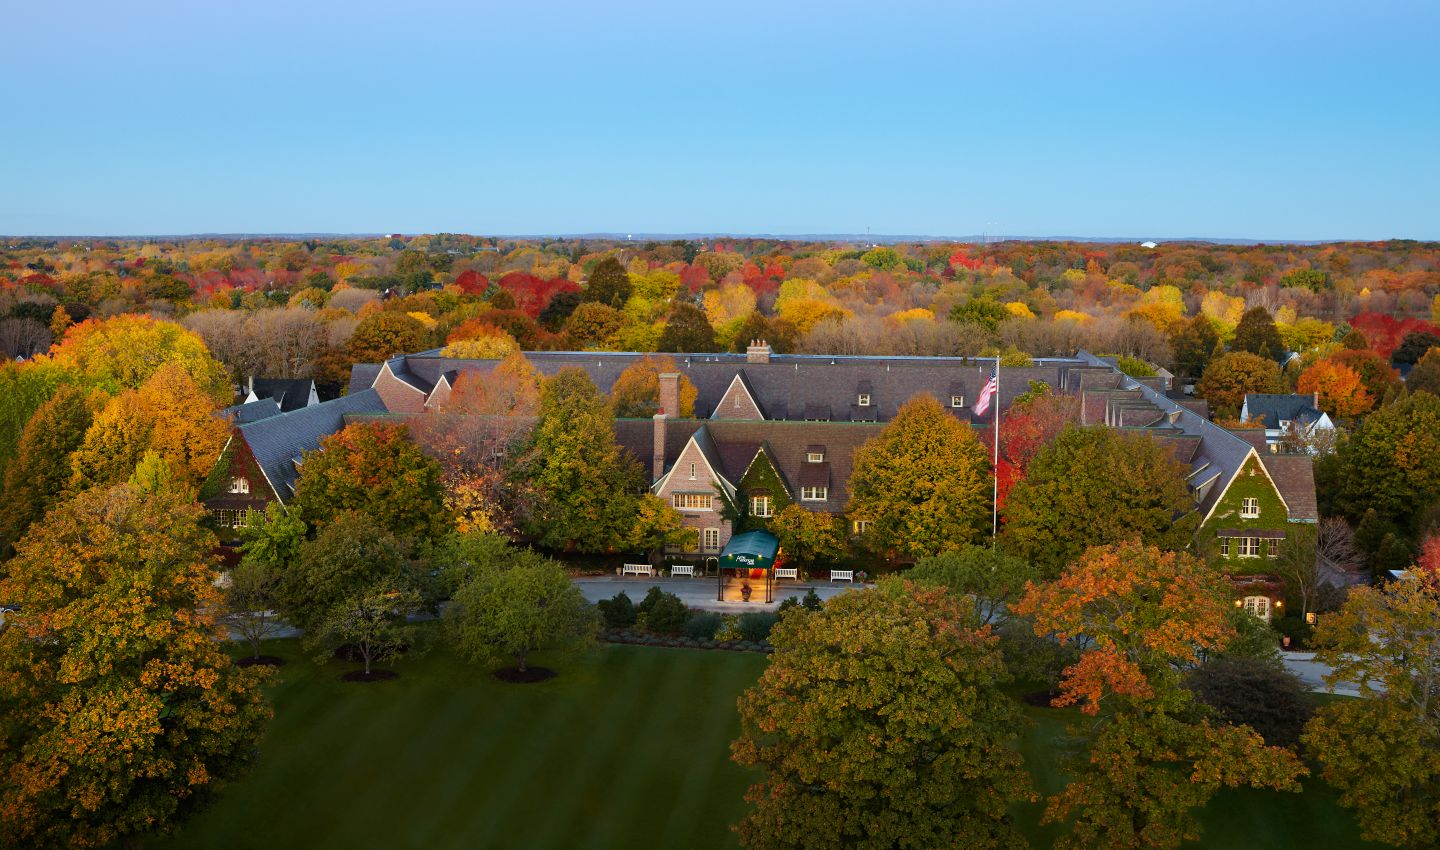 overview look of The American Club, a historic building surrounded by trees with changing leaves in fall